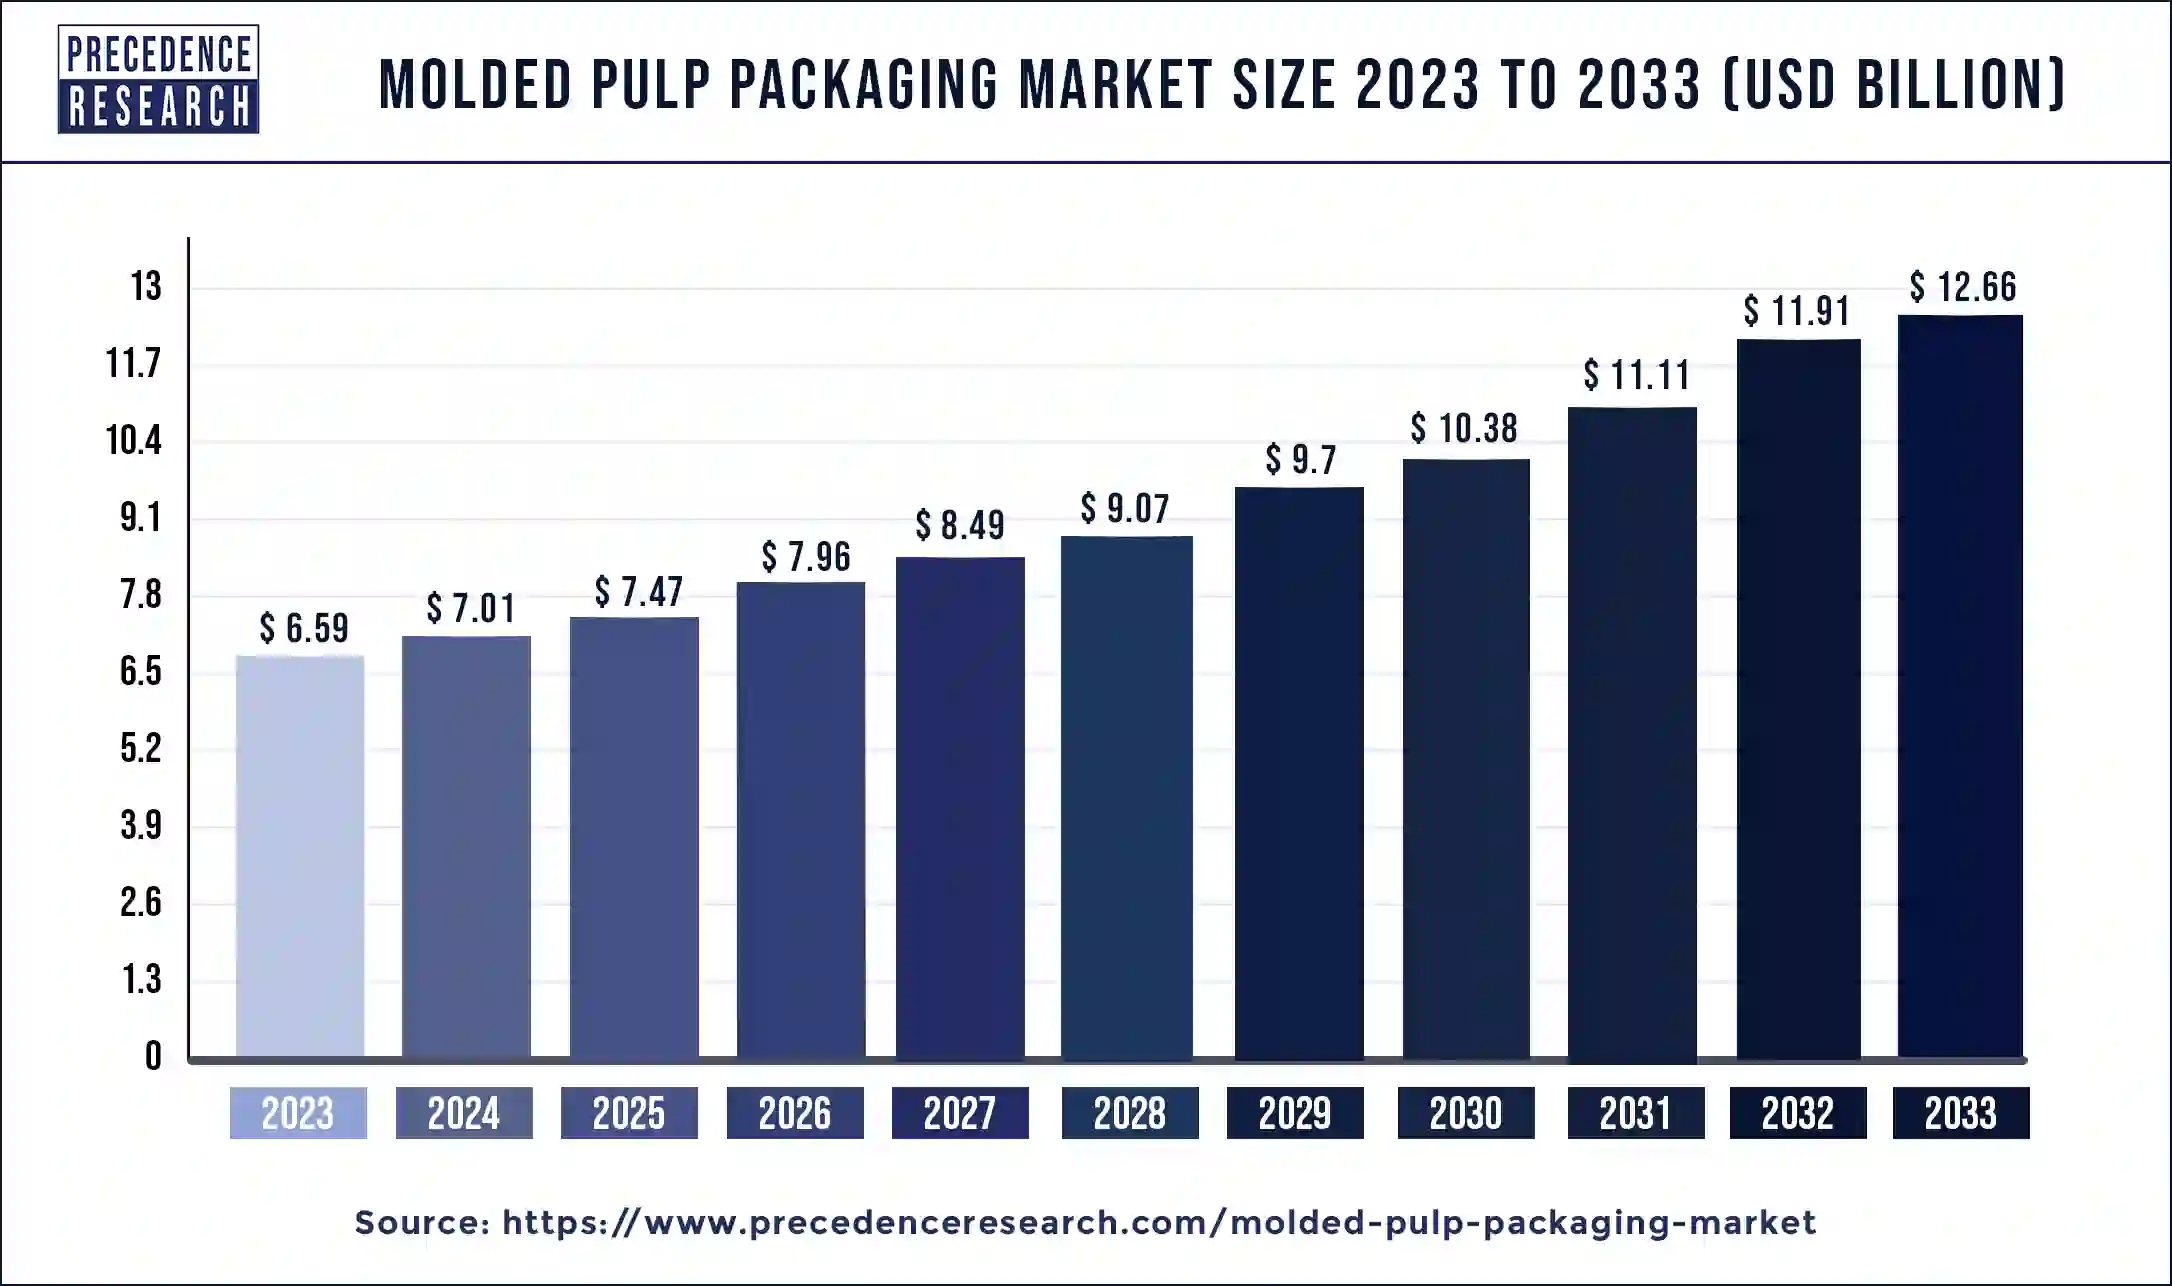 Molded Pulp Packaging Market Size 2024 to 2033